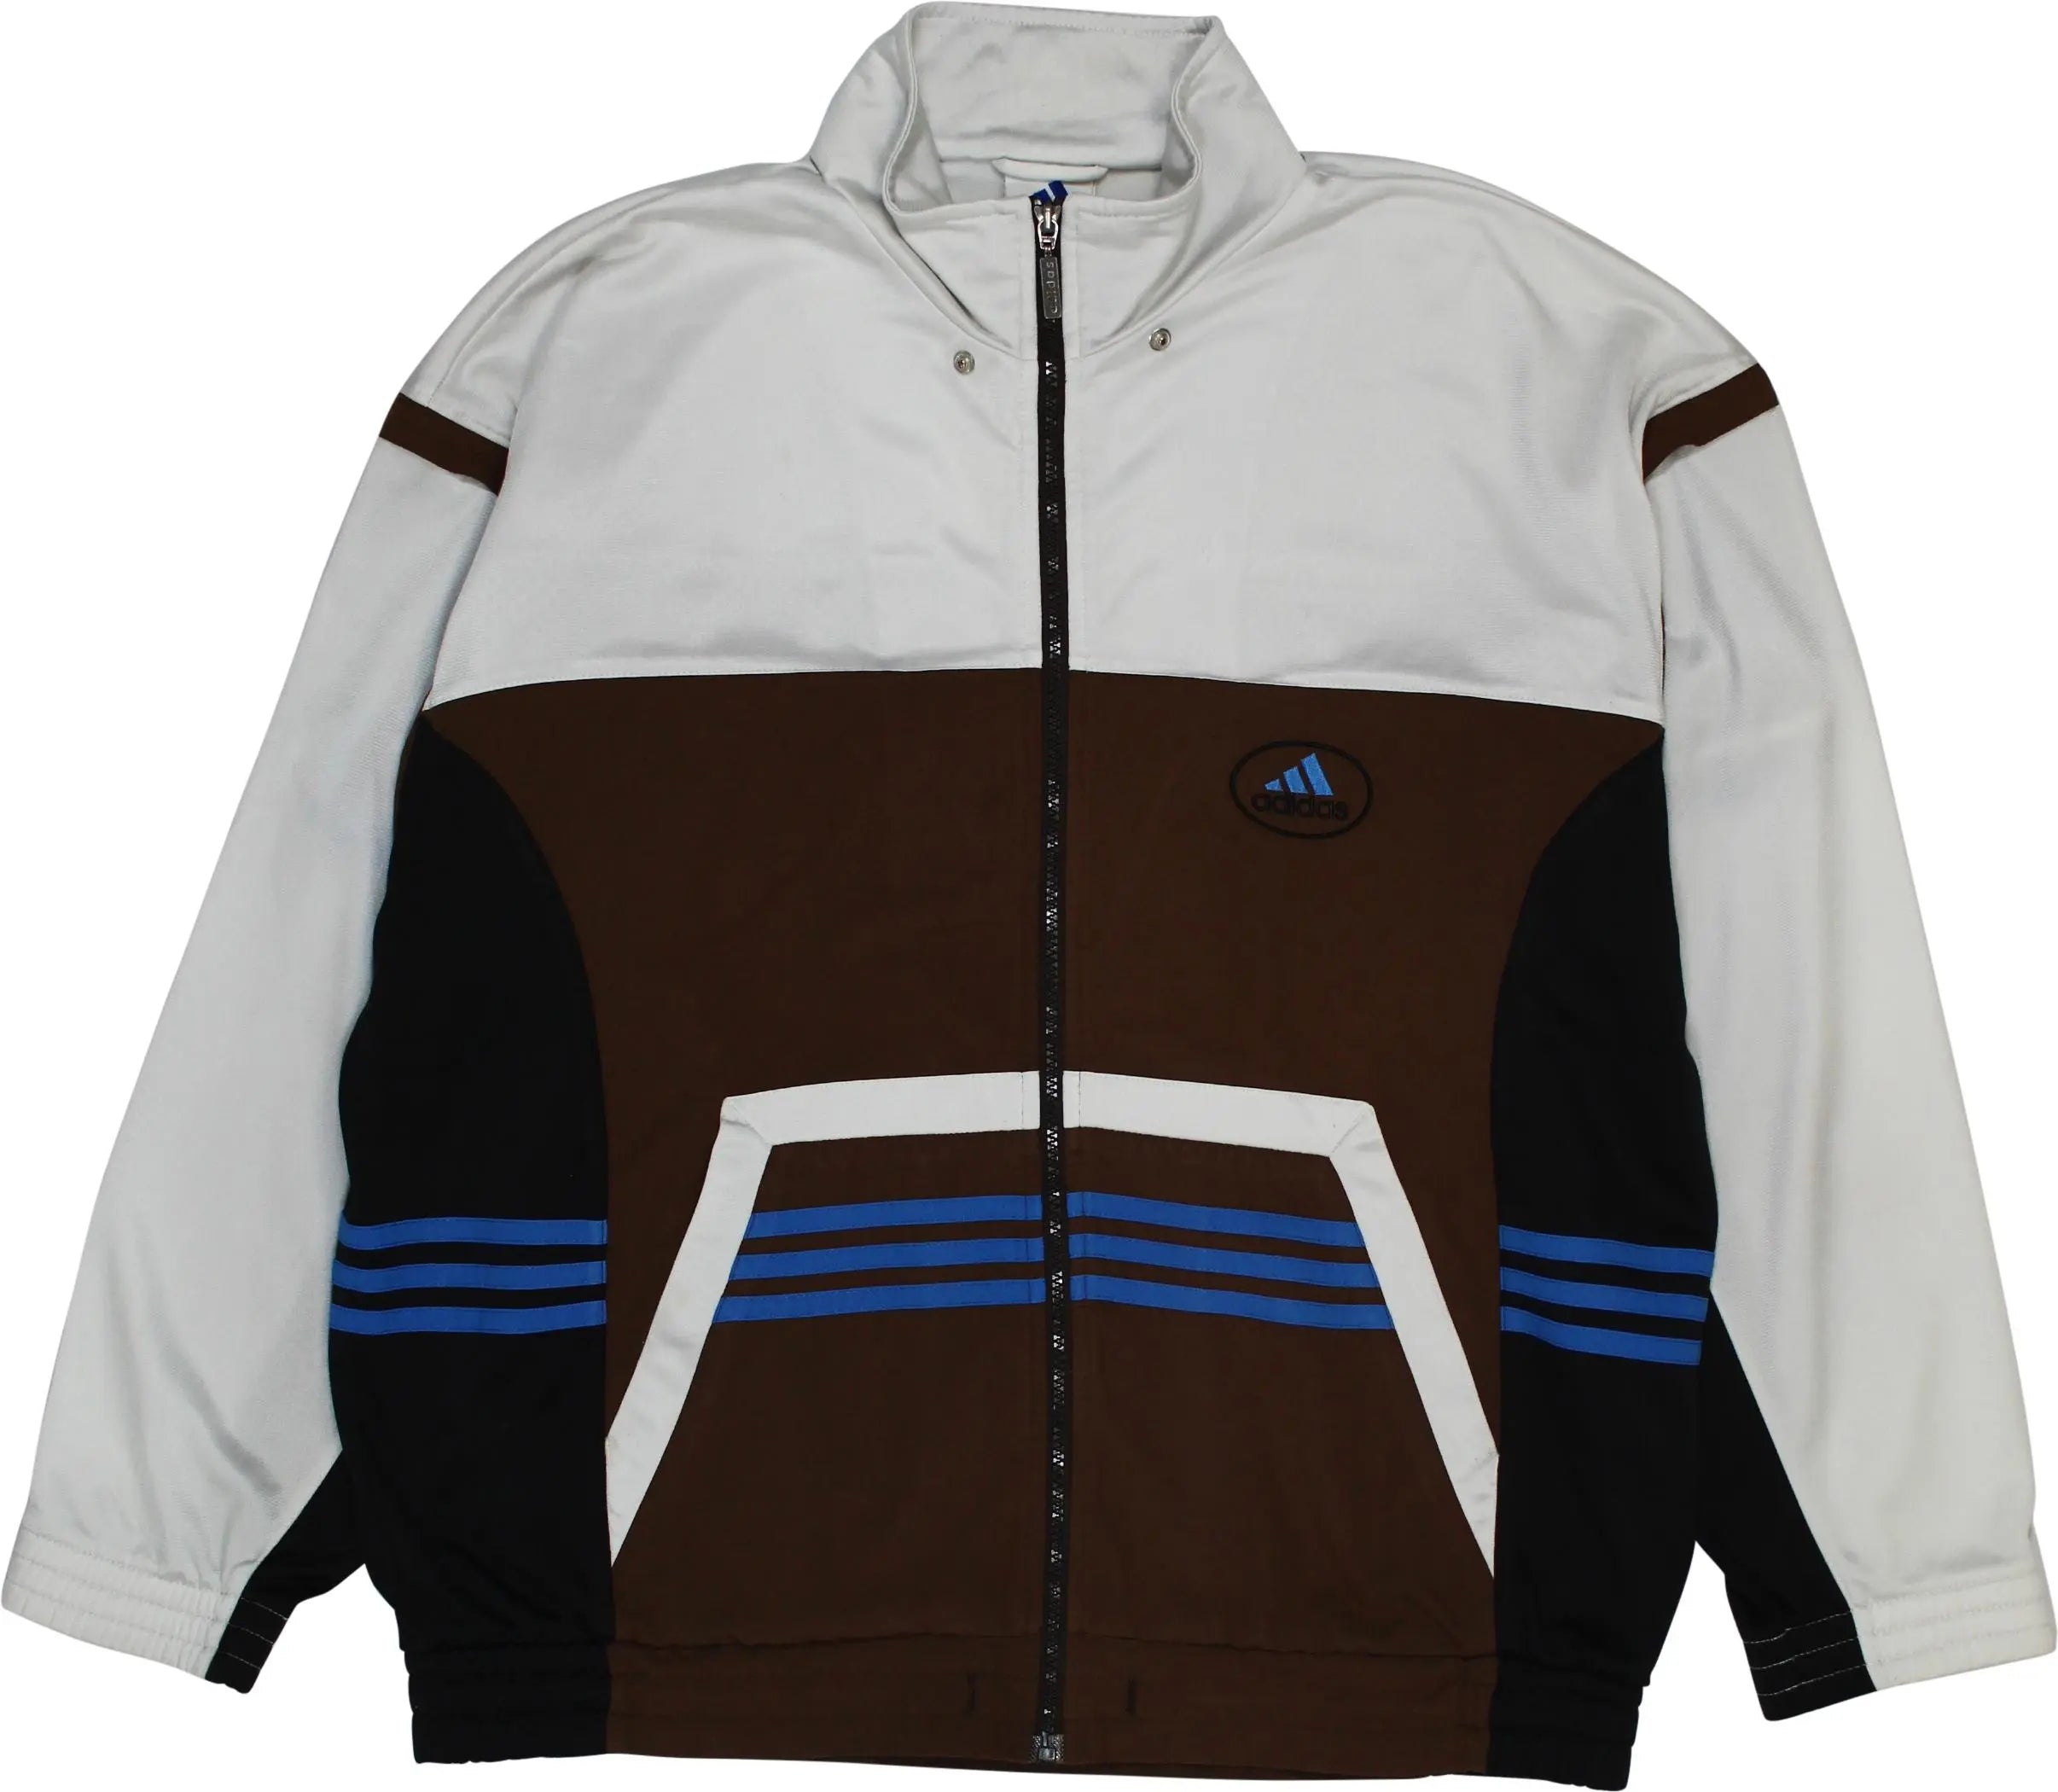 Adidas - Track Jacket with Removable Sleeves by Adidas- ThriftTale.com - Vintage and second handclothing